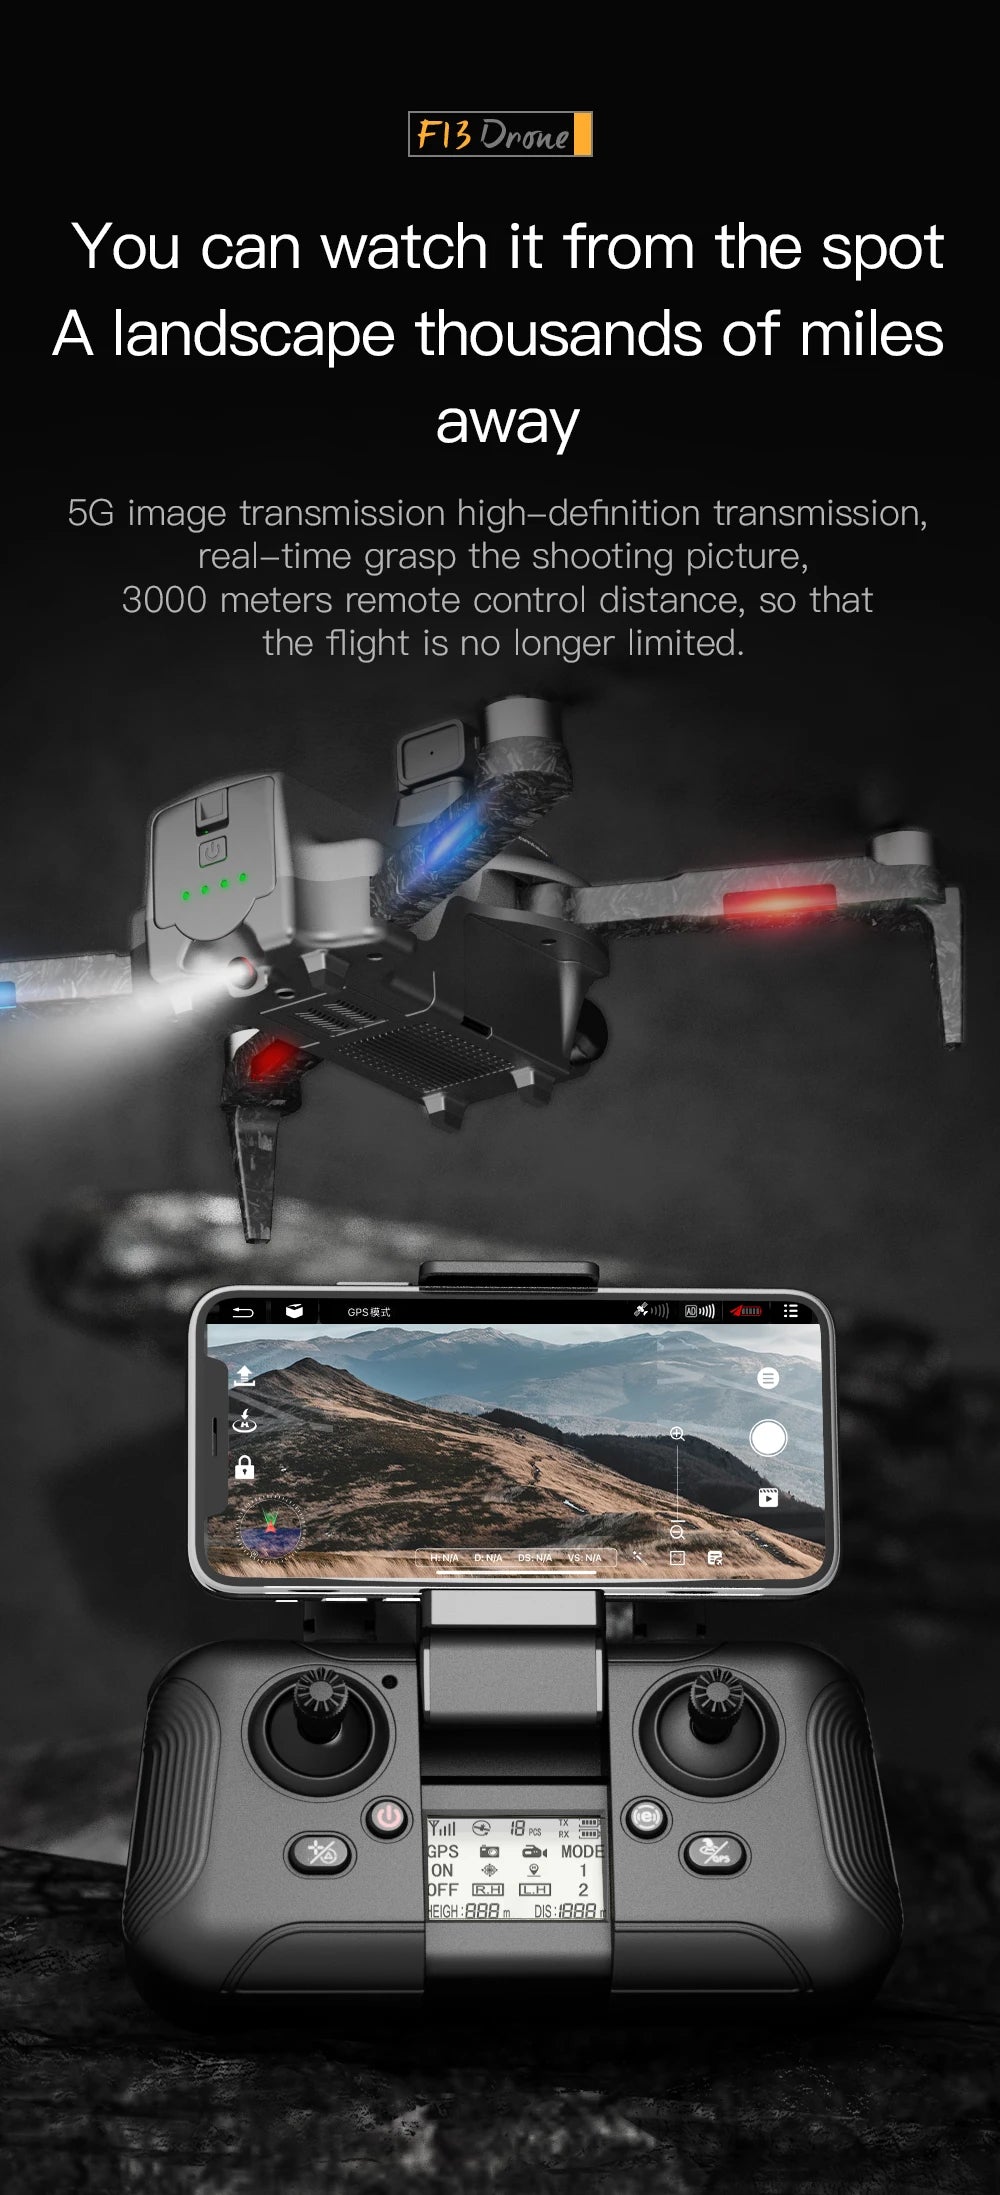 F13 Drone, 5G image transmission high-definition transmission . real-time grasp the shooting picture